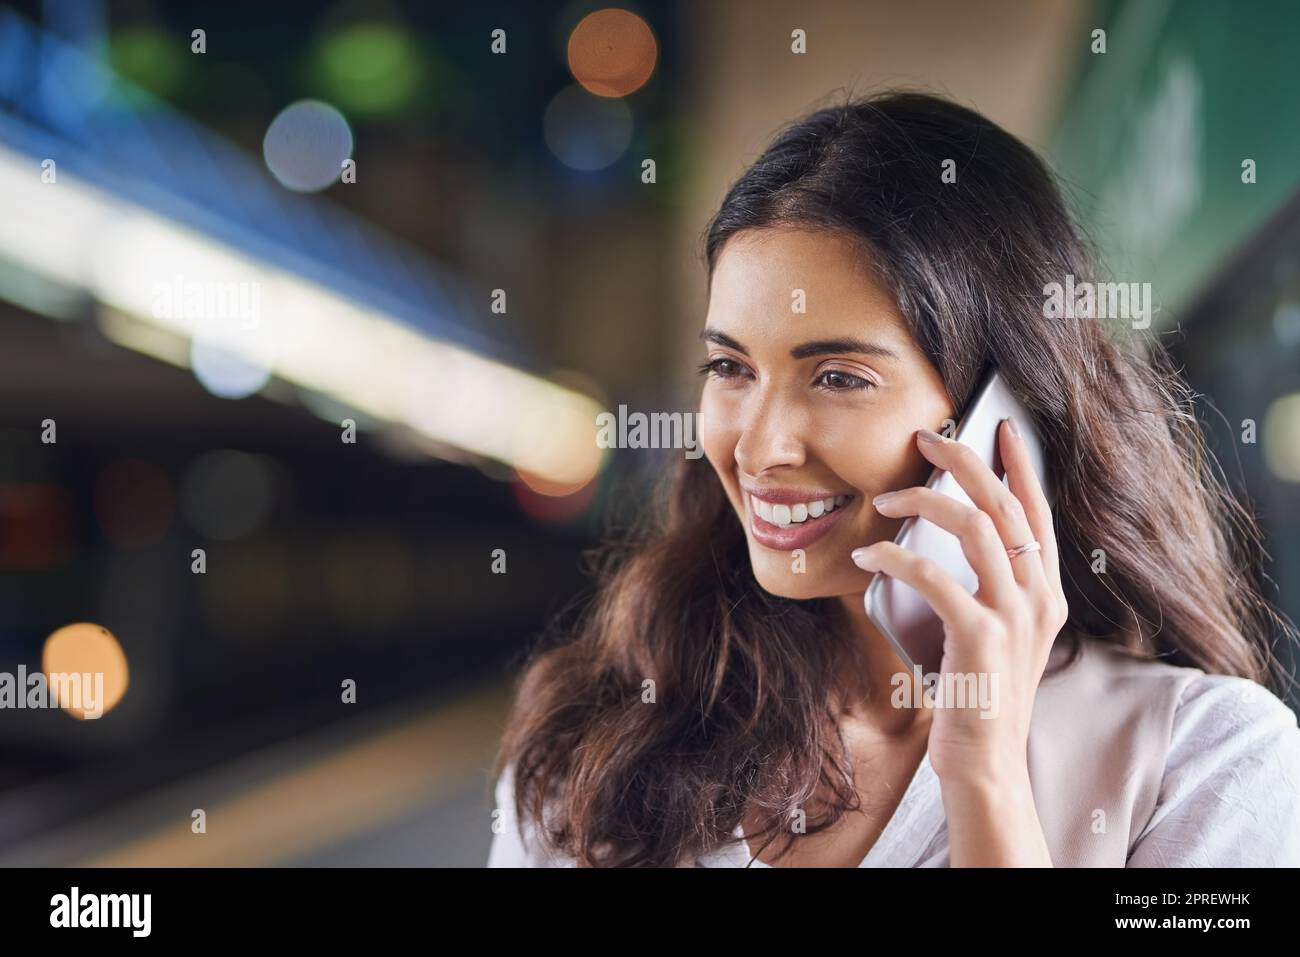 Commuting with a call. a young attractive woman on a call and using the train to commute. Stock Photo